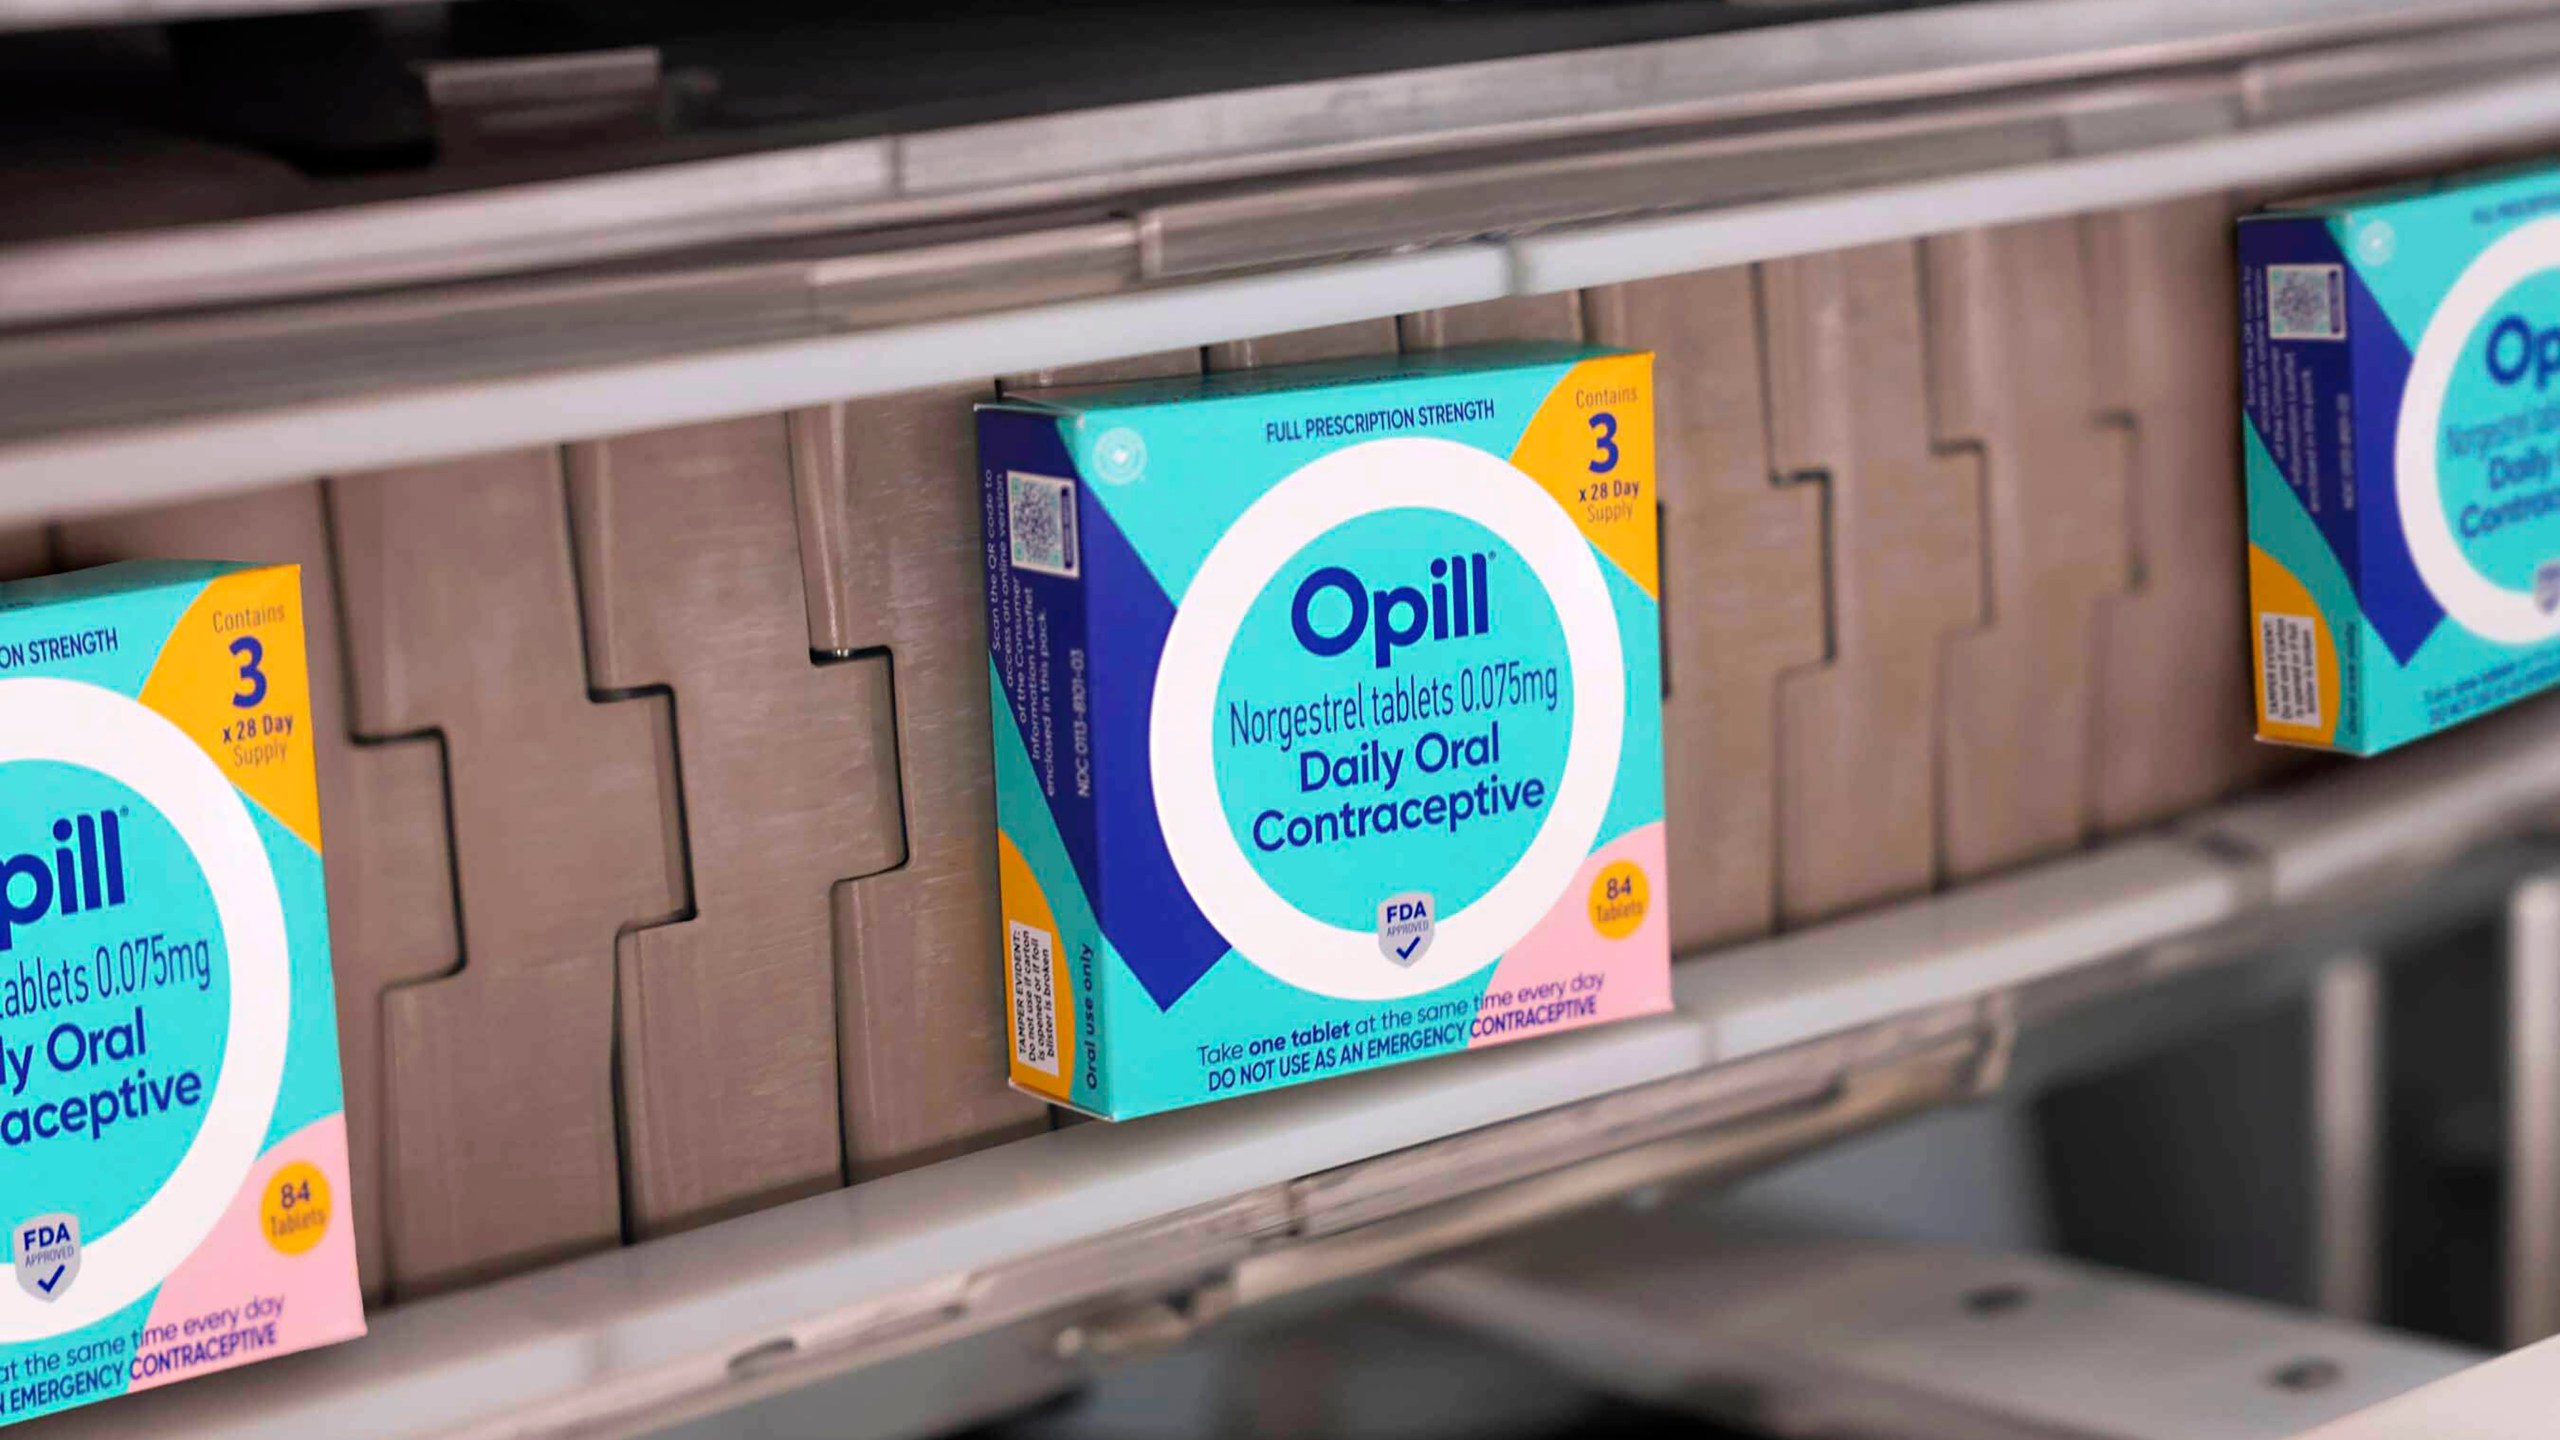 This image provided by Perrigo Company shows boxes of Opill, the first over-the-counter birth control pill available later this month in the United States. Manufacturer Perrigo said Monday, March 4, 2024 that it has begun shipping the medication, called Opill, to major retailers and pharmacies. (Perrigo Company via AP)